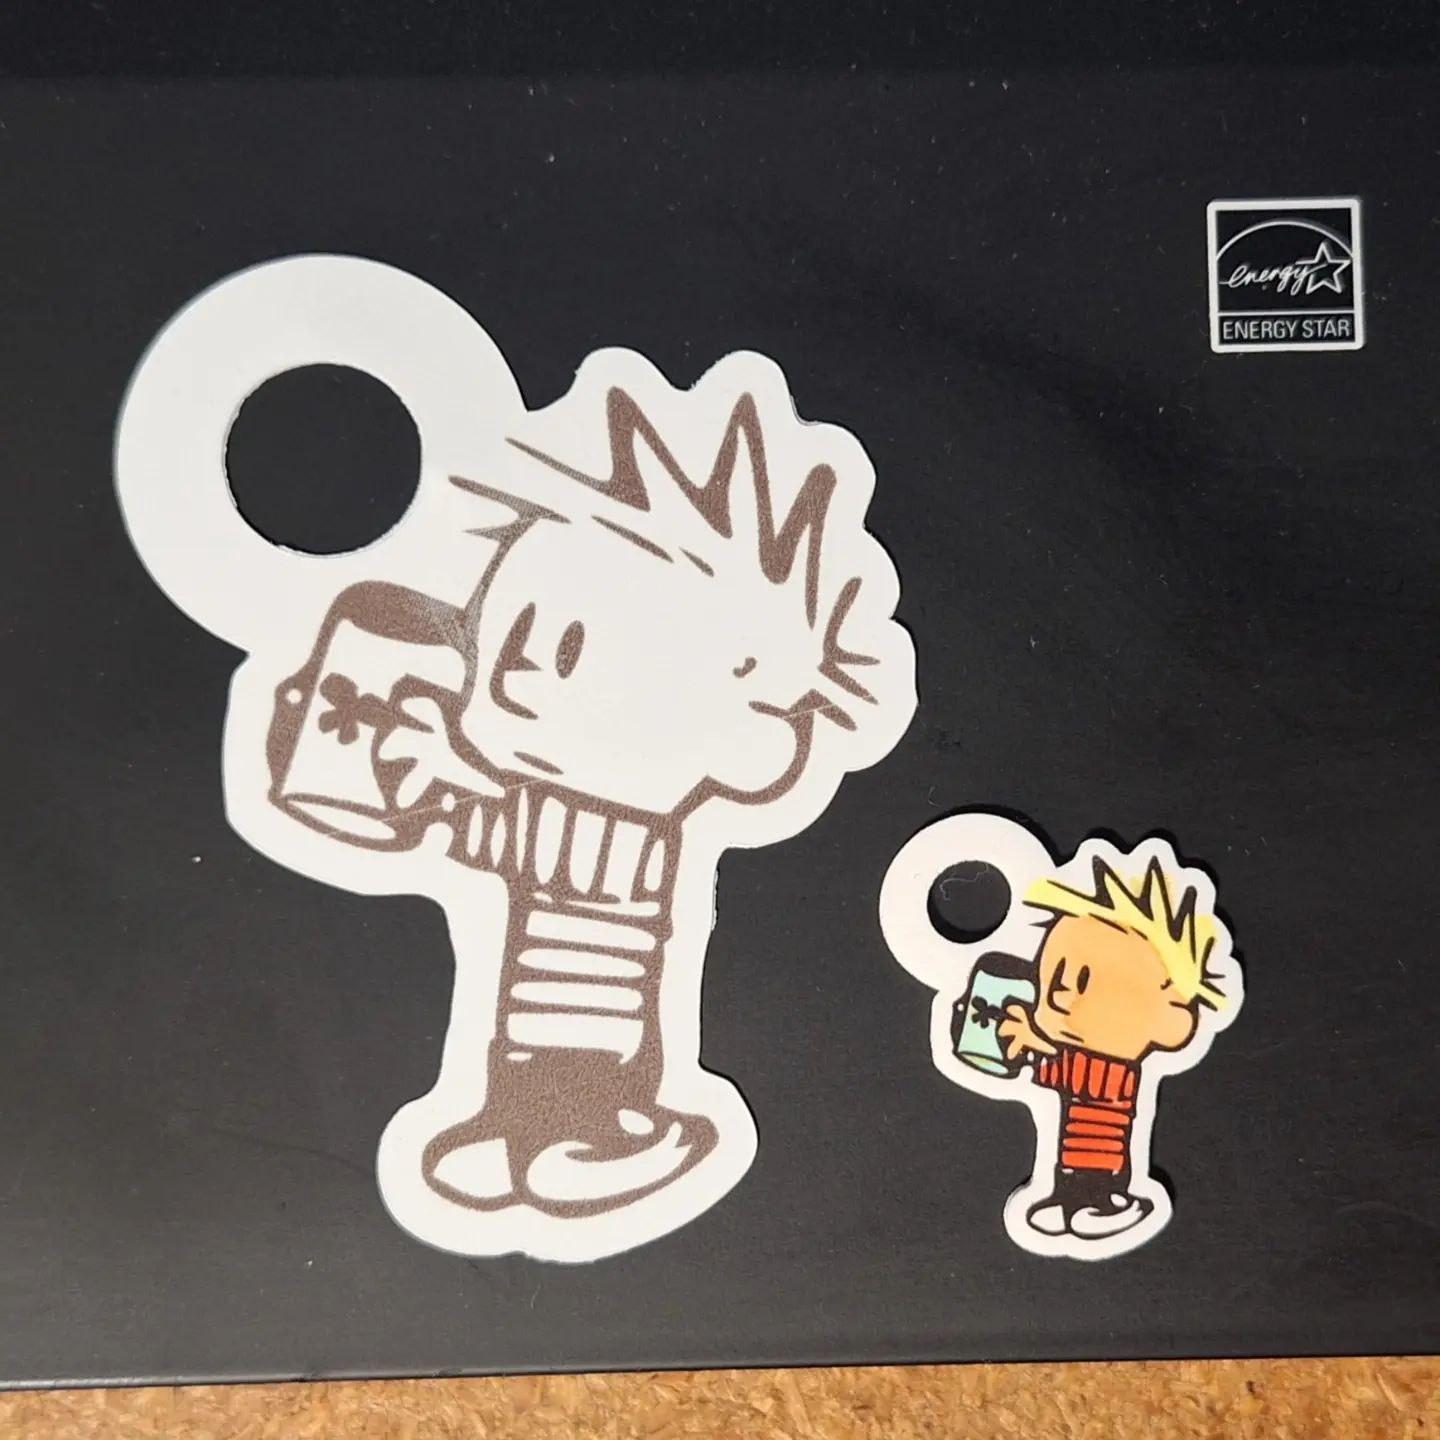 Shrinky dink.... trying to get settings right! #shrink #shrinkplastic #shrinkydink #shrinkydinks #calvinandhobbes